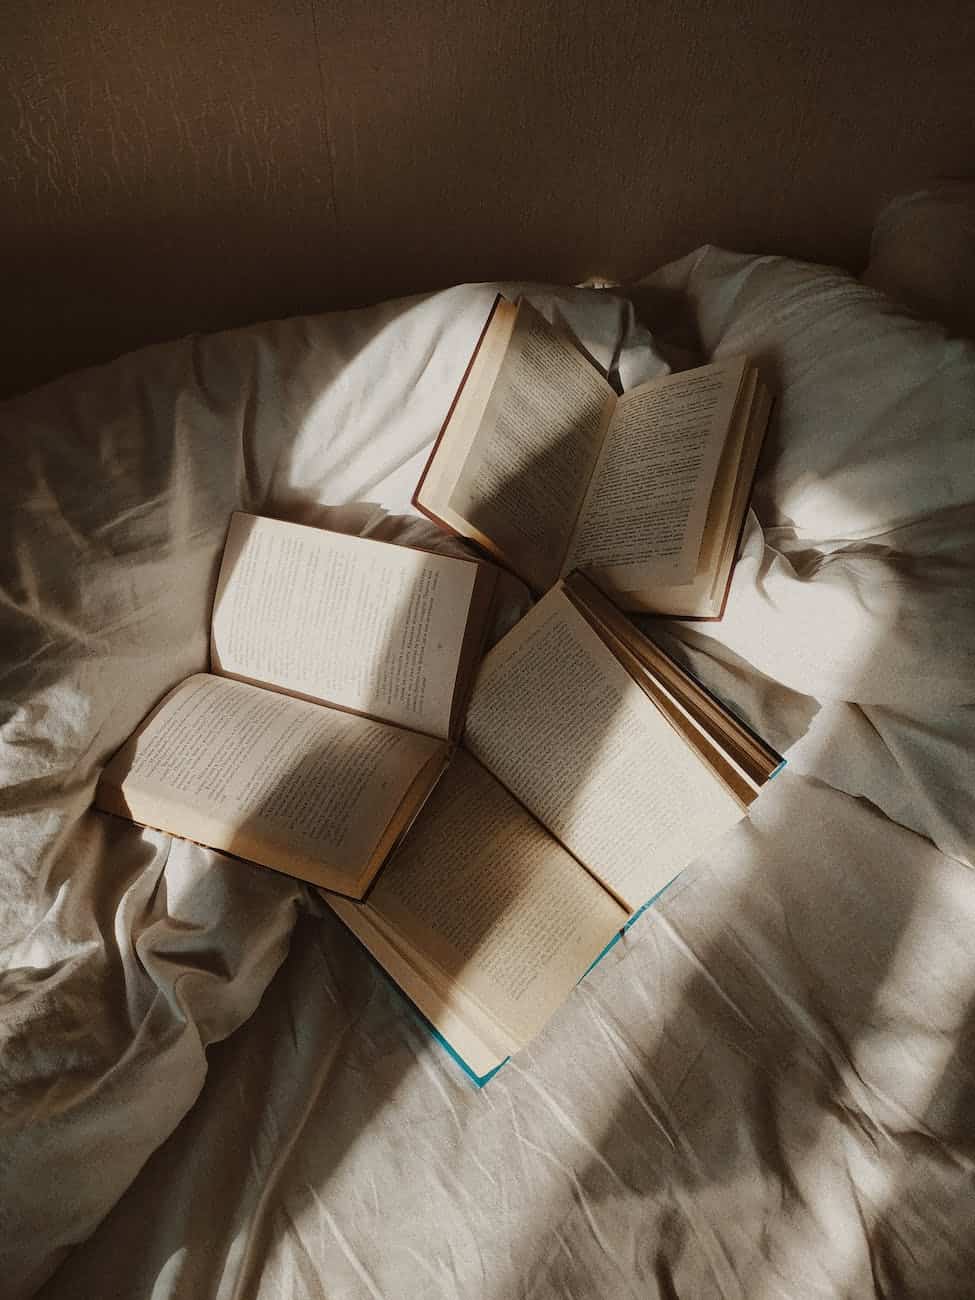 opened books placed on disheveled bed